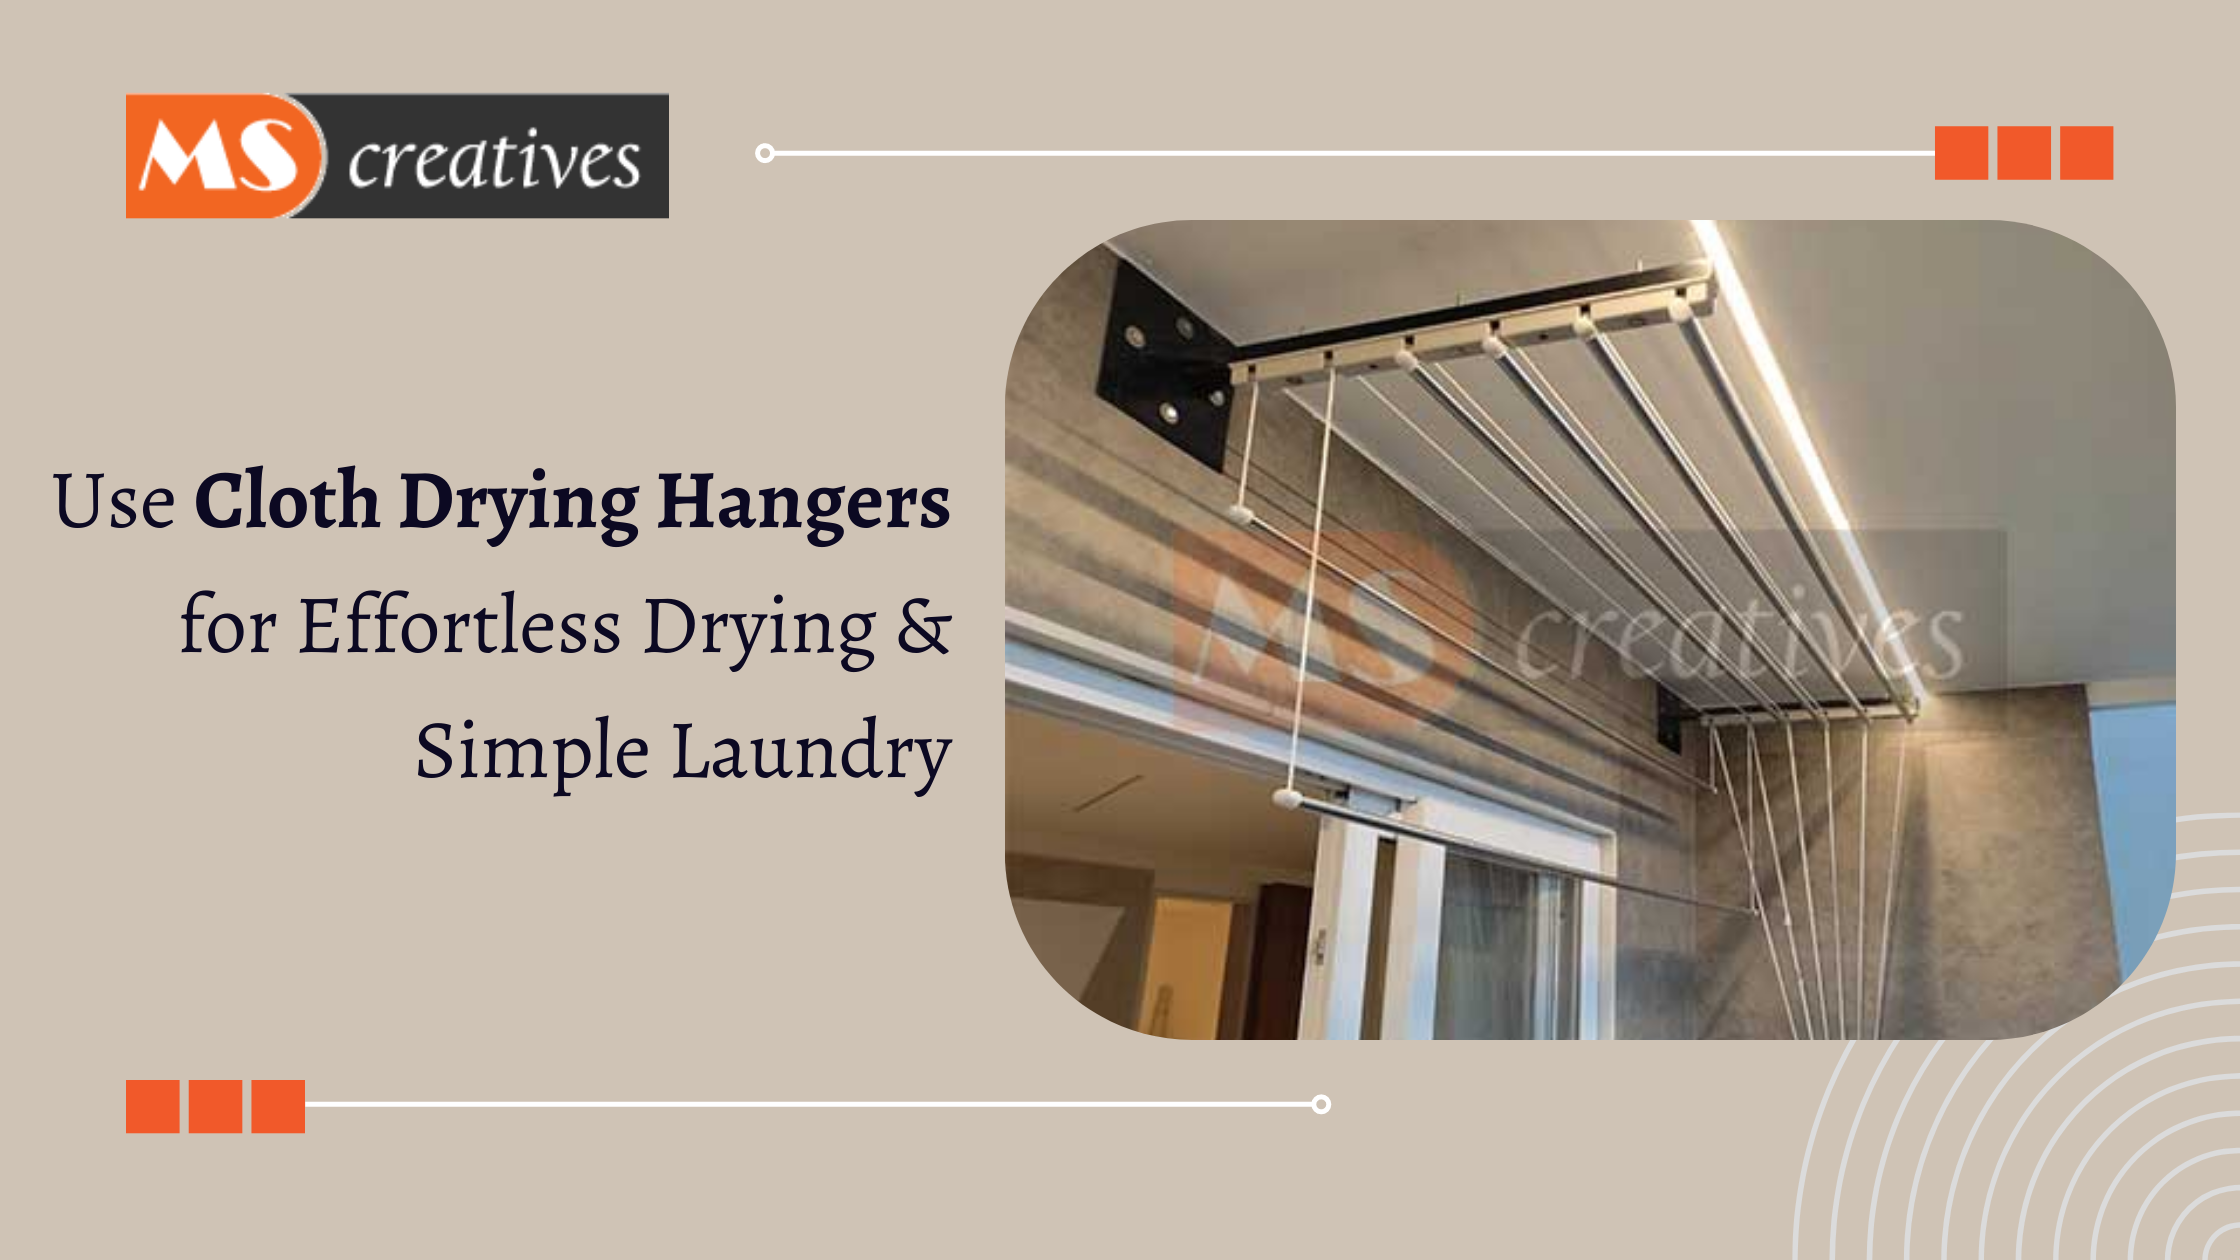 You are currently viewing Use Cloth Drying Hangers for Effortless Drying & Simple Laundry | MS Creatives